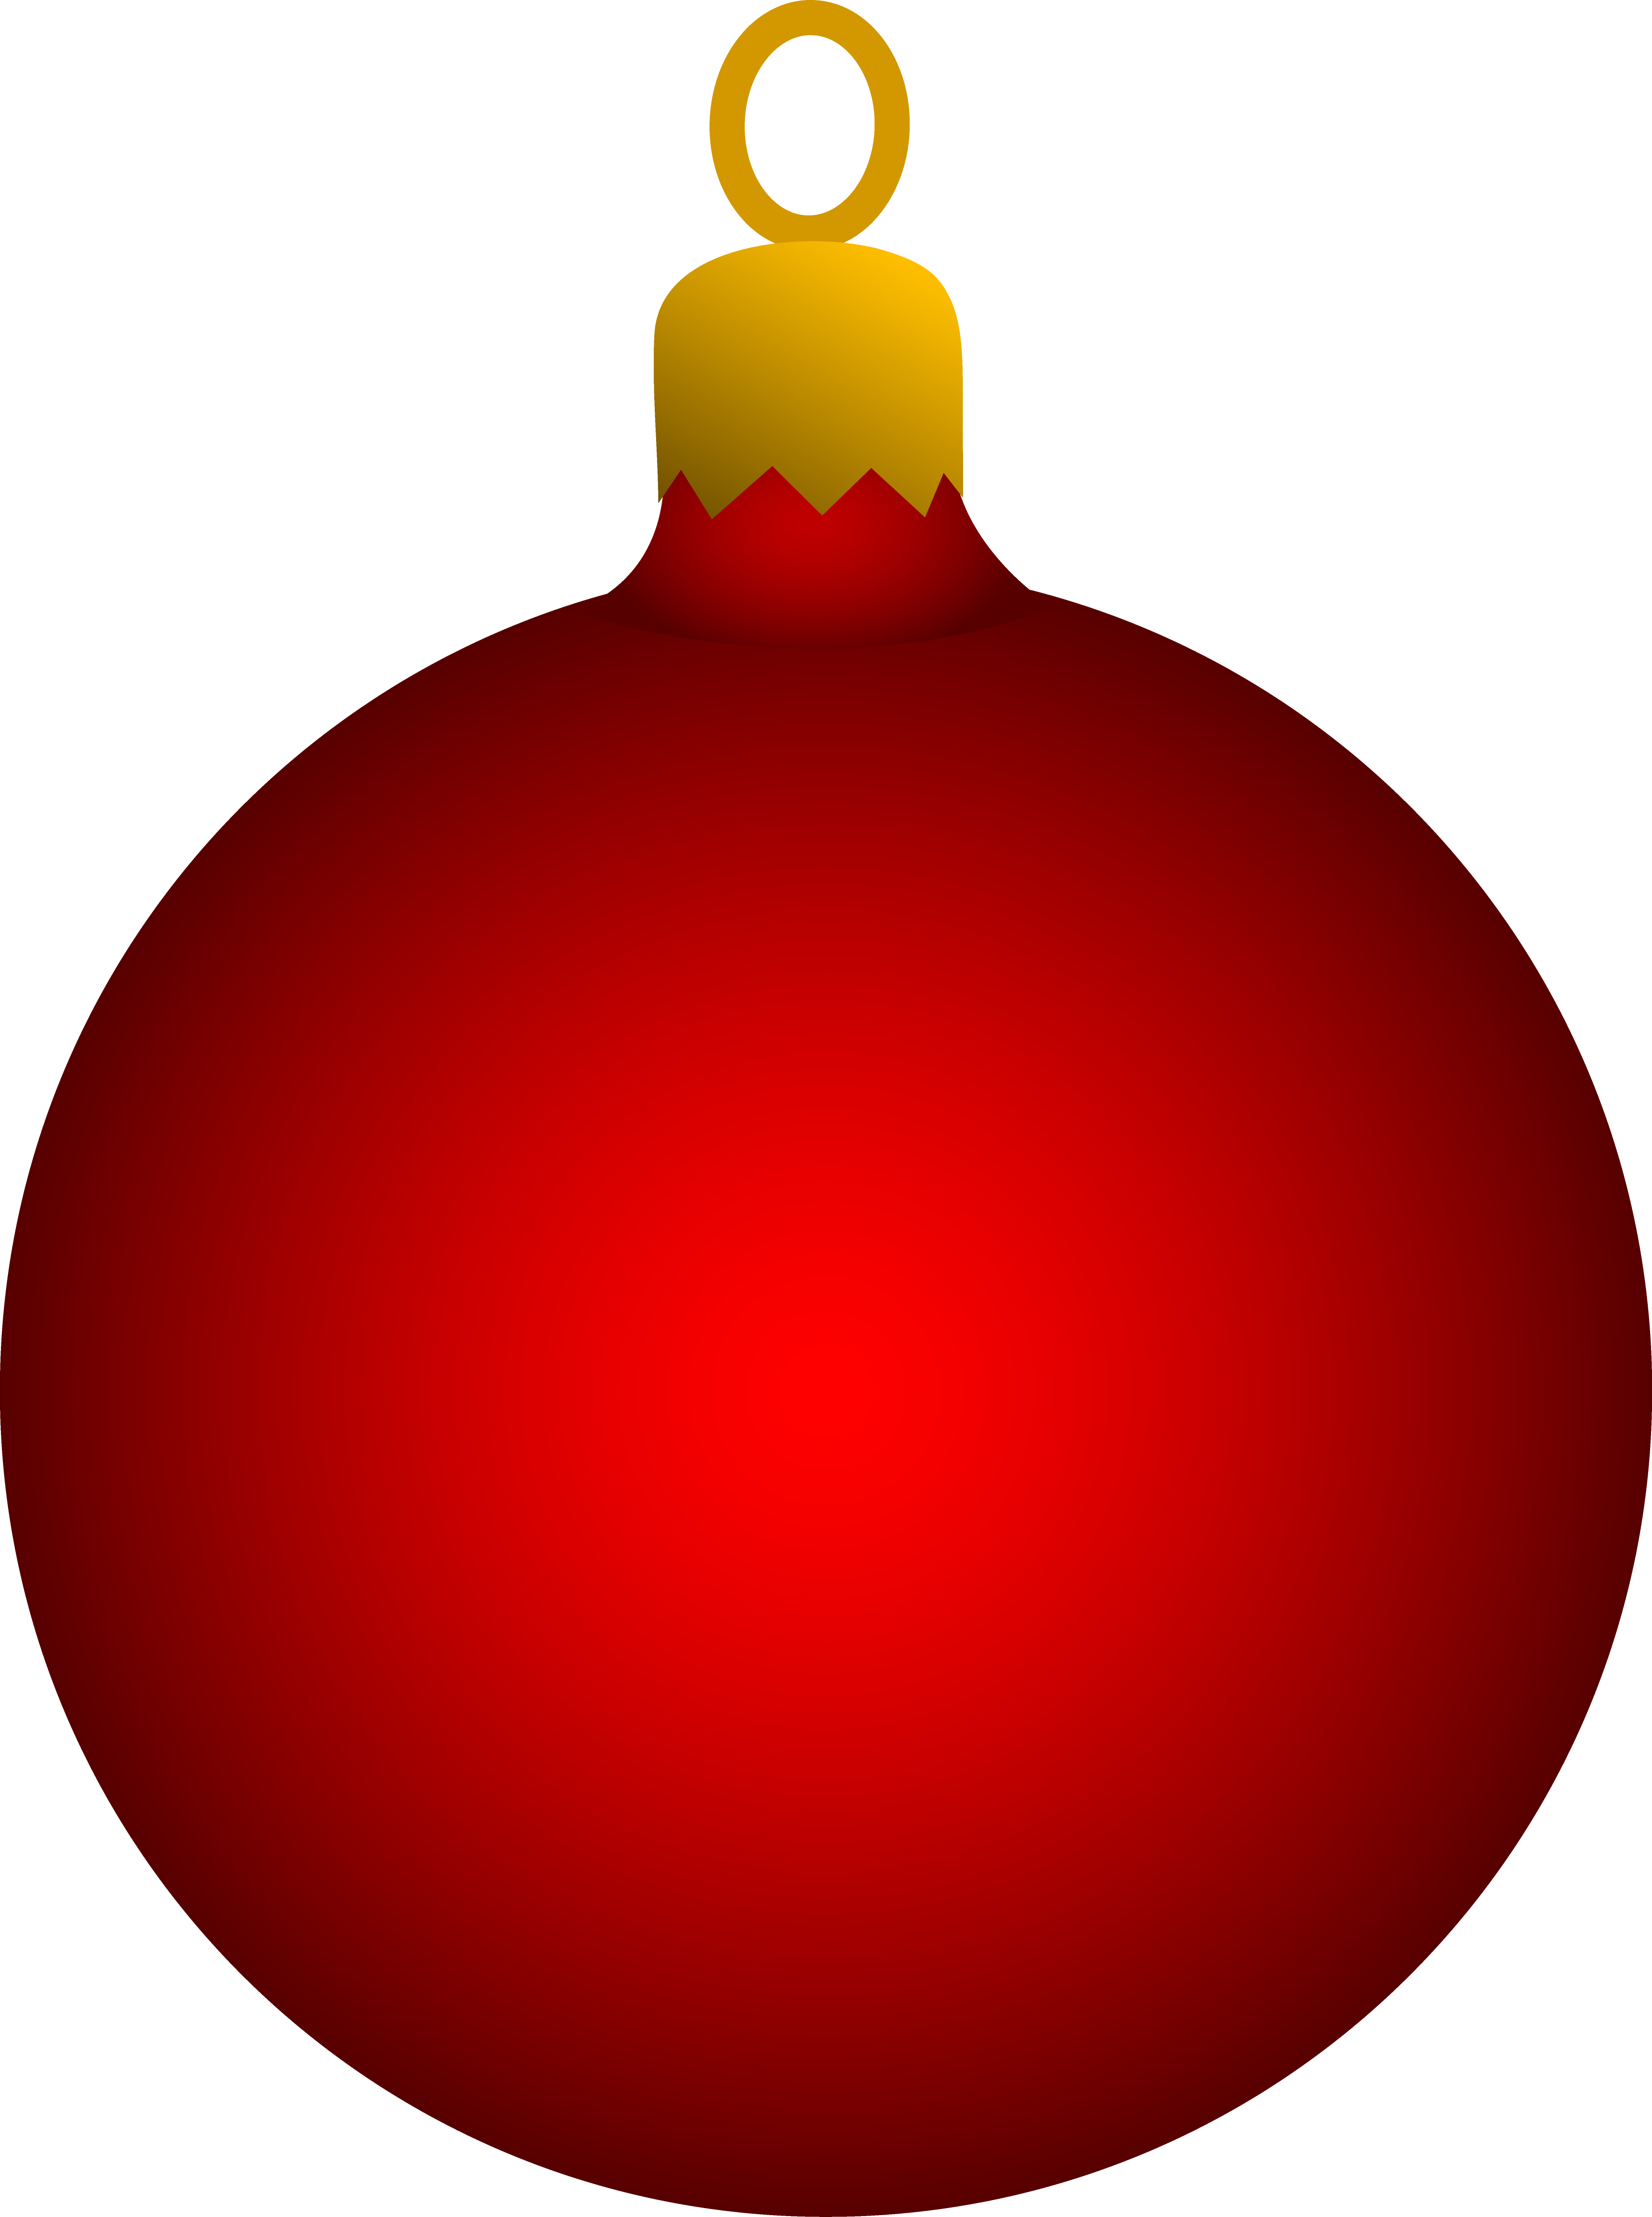 Free Christmas Decorations Clipart, Download Free Clip Art.